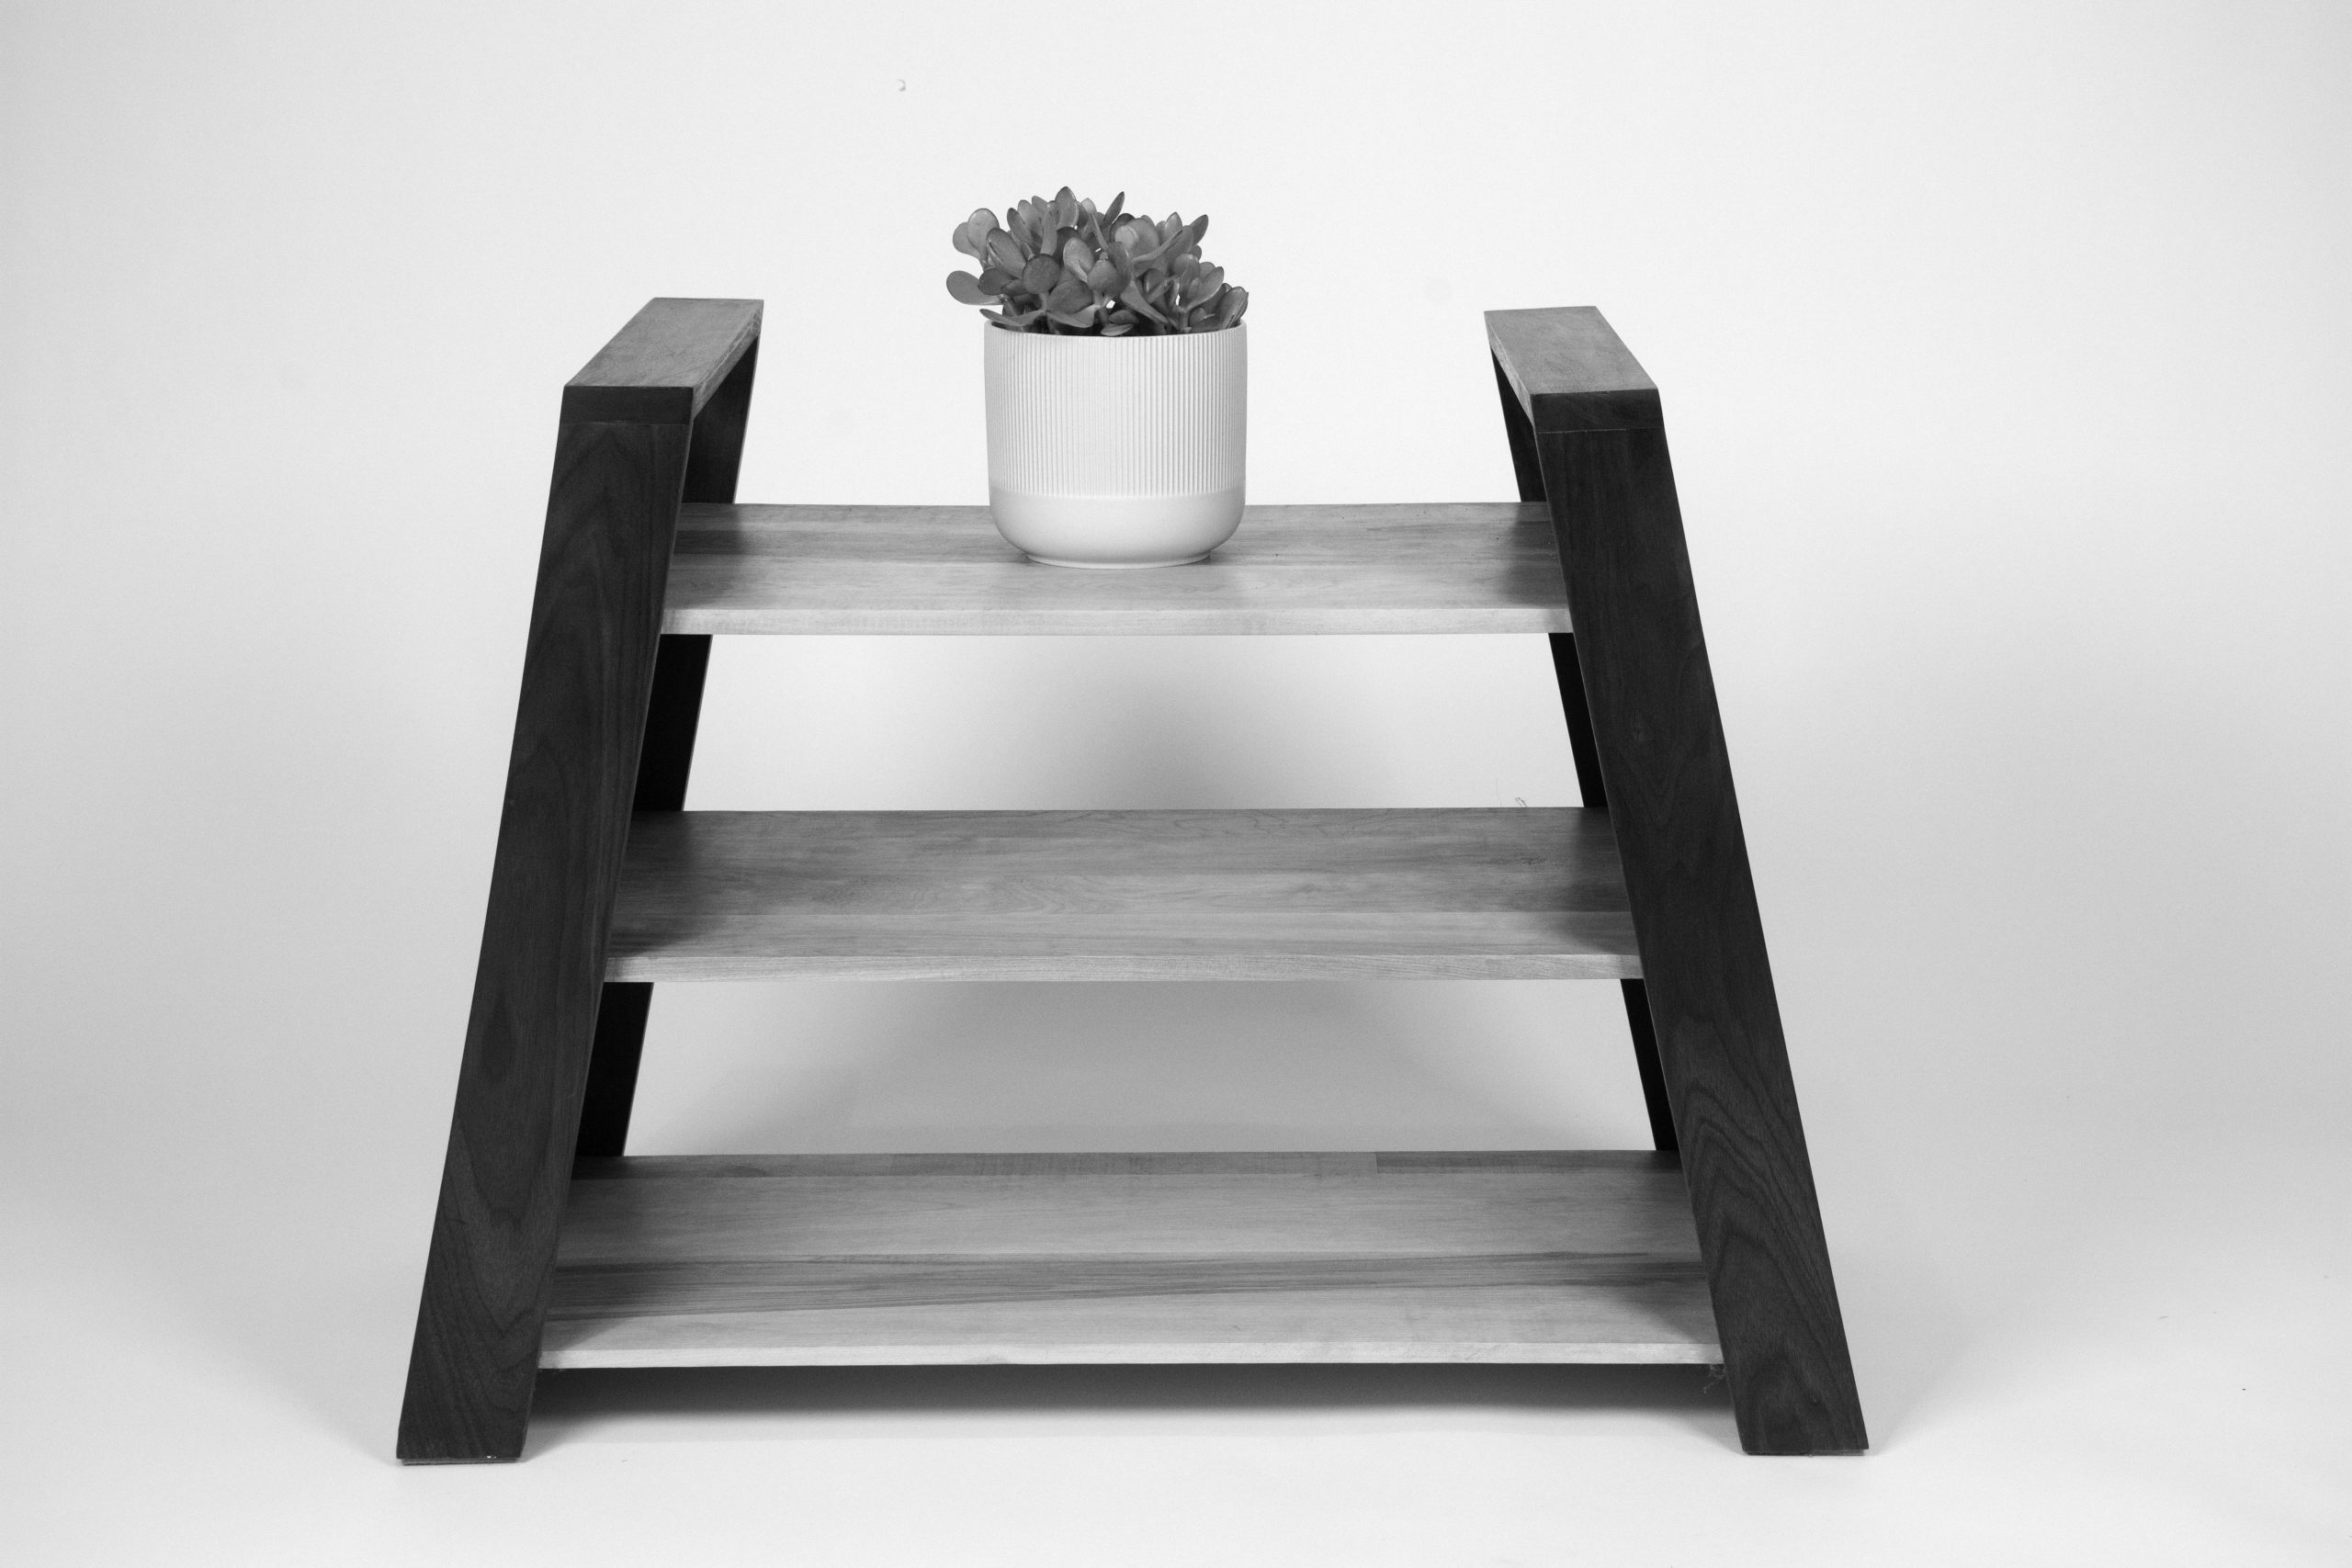 black and white image of a 3 shelved table with a pot on top